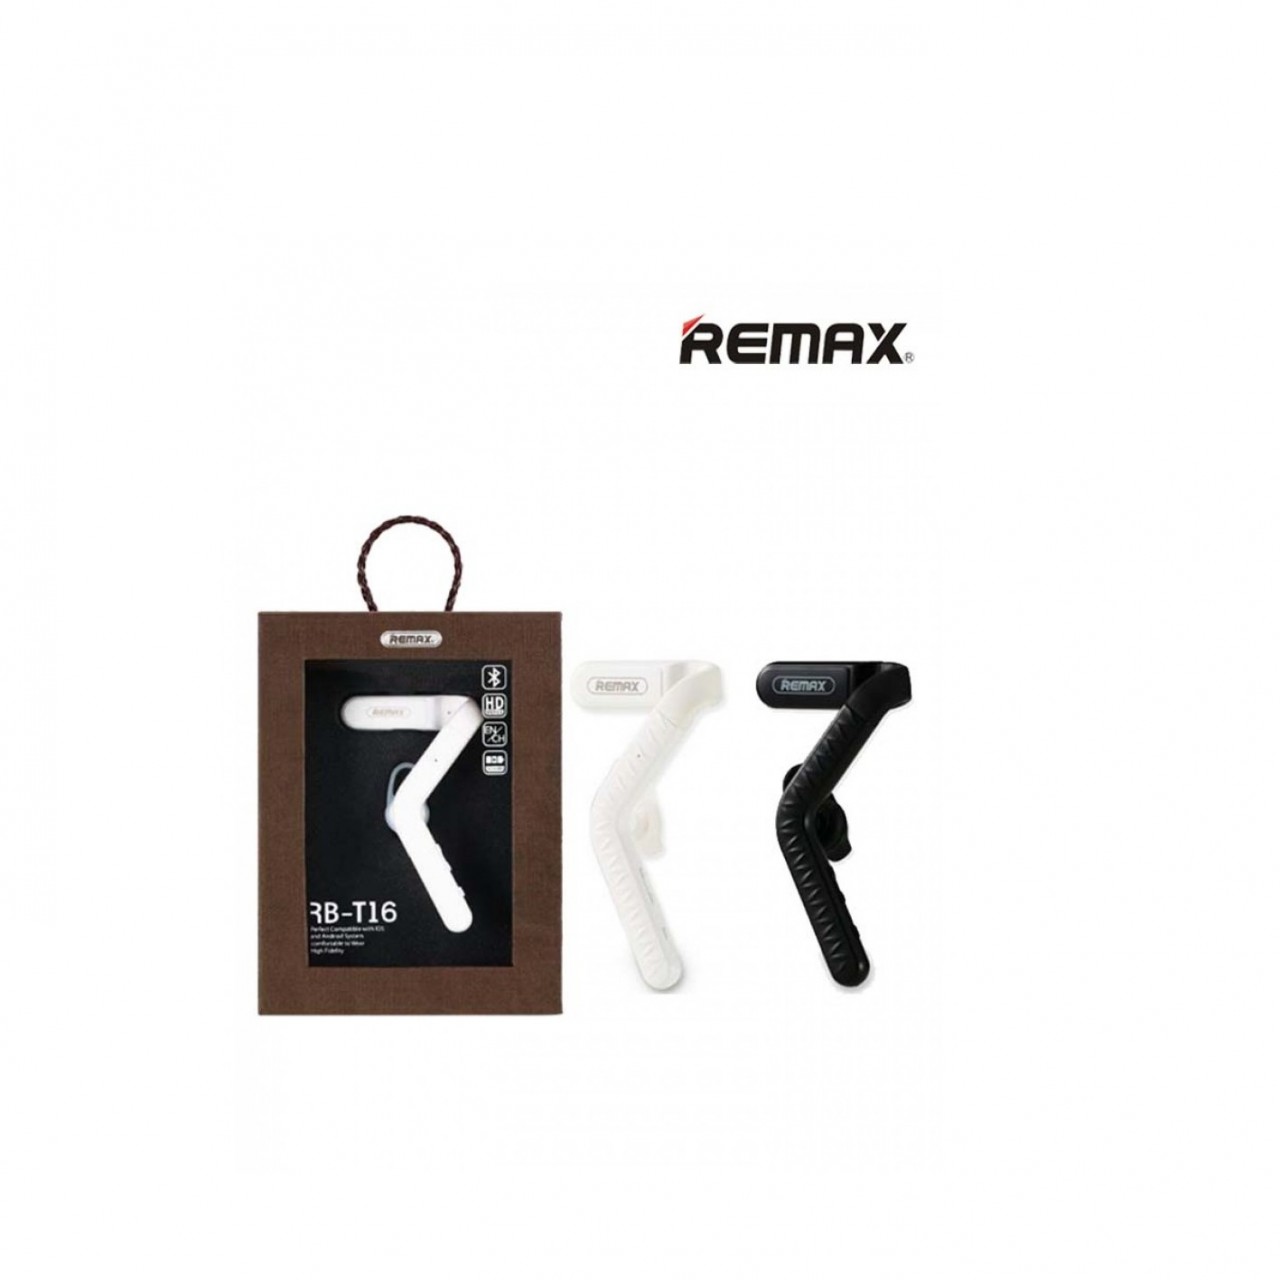 Remax RB-T16 Bluetooth Headset - IOS & Android Compatible